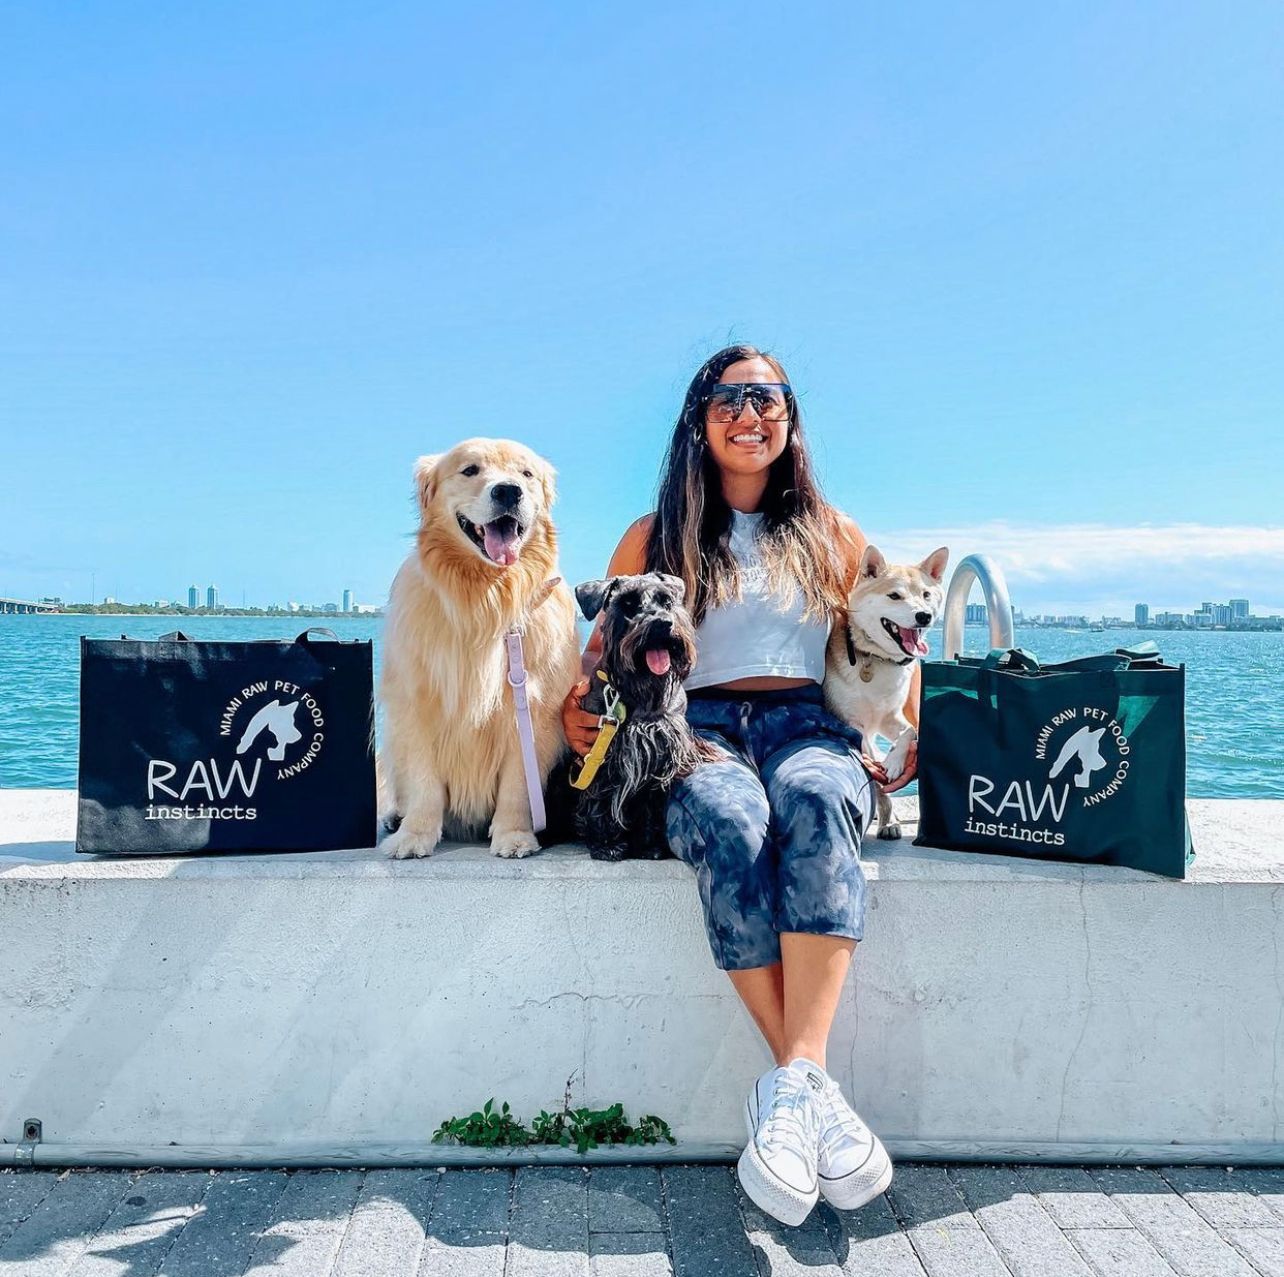 Founder of Raw Instincts Mia with Ziggy and two guest dogs from Doggizen